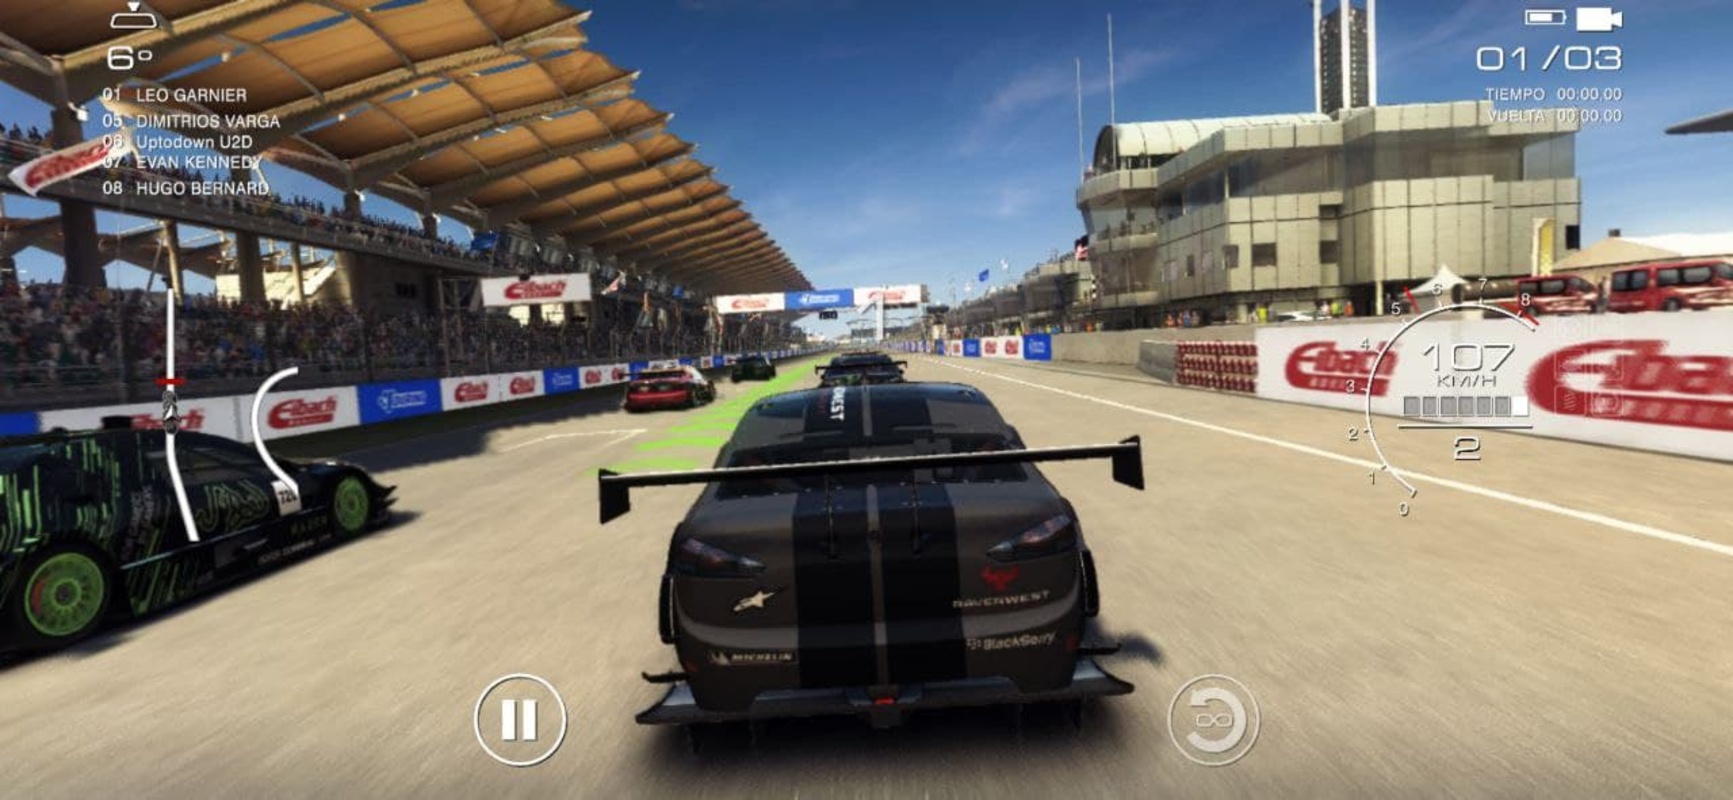 grid autosport android 4pda